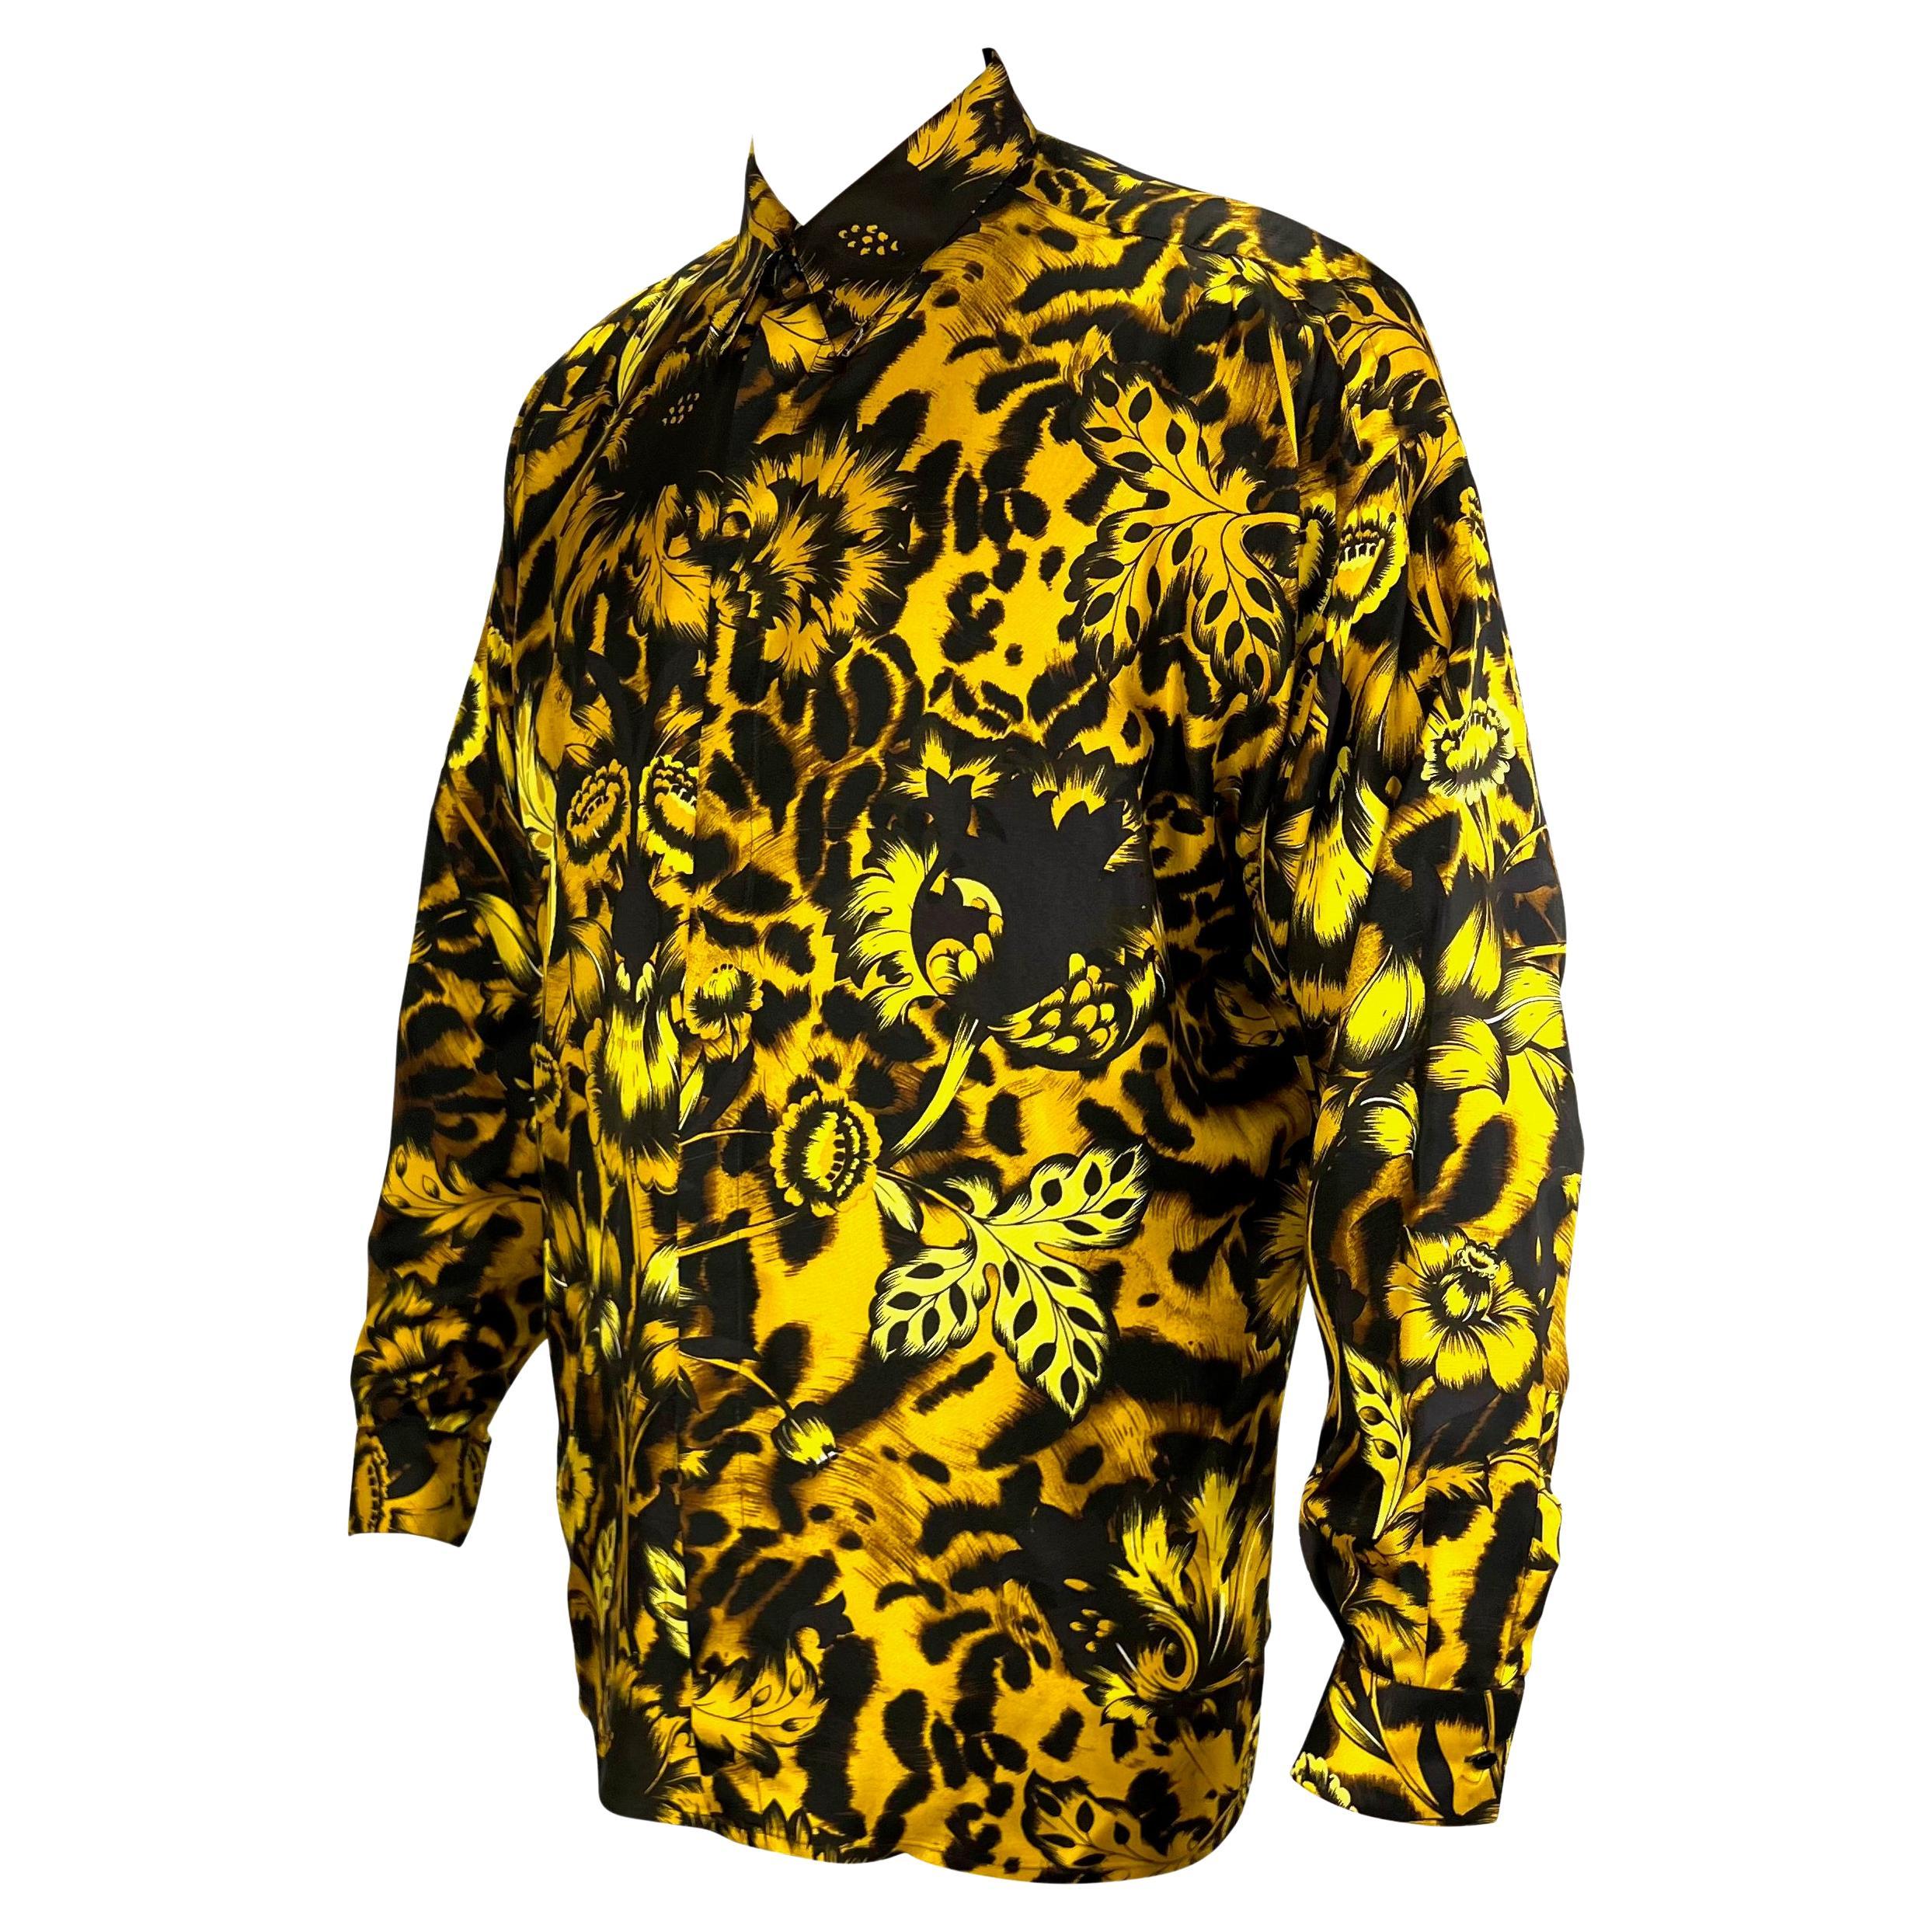 TheRealList presents: an incredible men's silk animal print floral Gianni Versace shirt, designed by Gianni Versace. From 1993, this amazing and soft shirt features a black and yellow floral and animal print throughout. This bold shirt is made